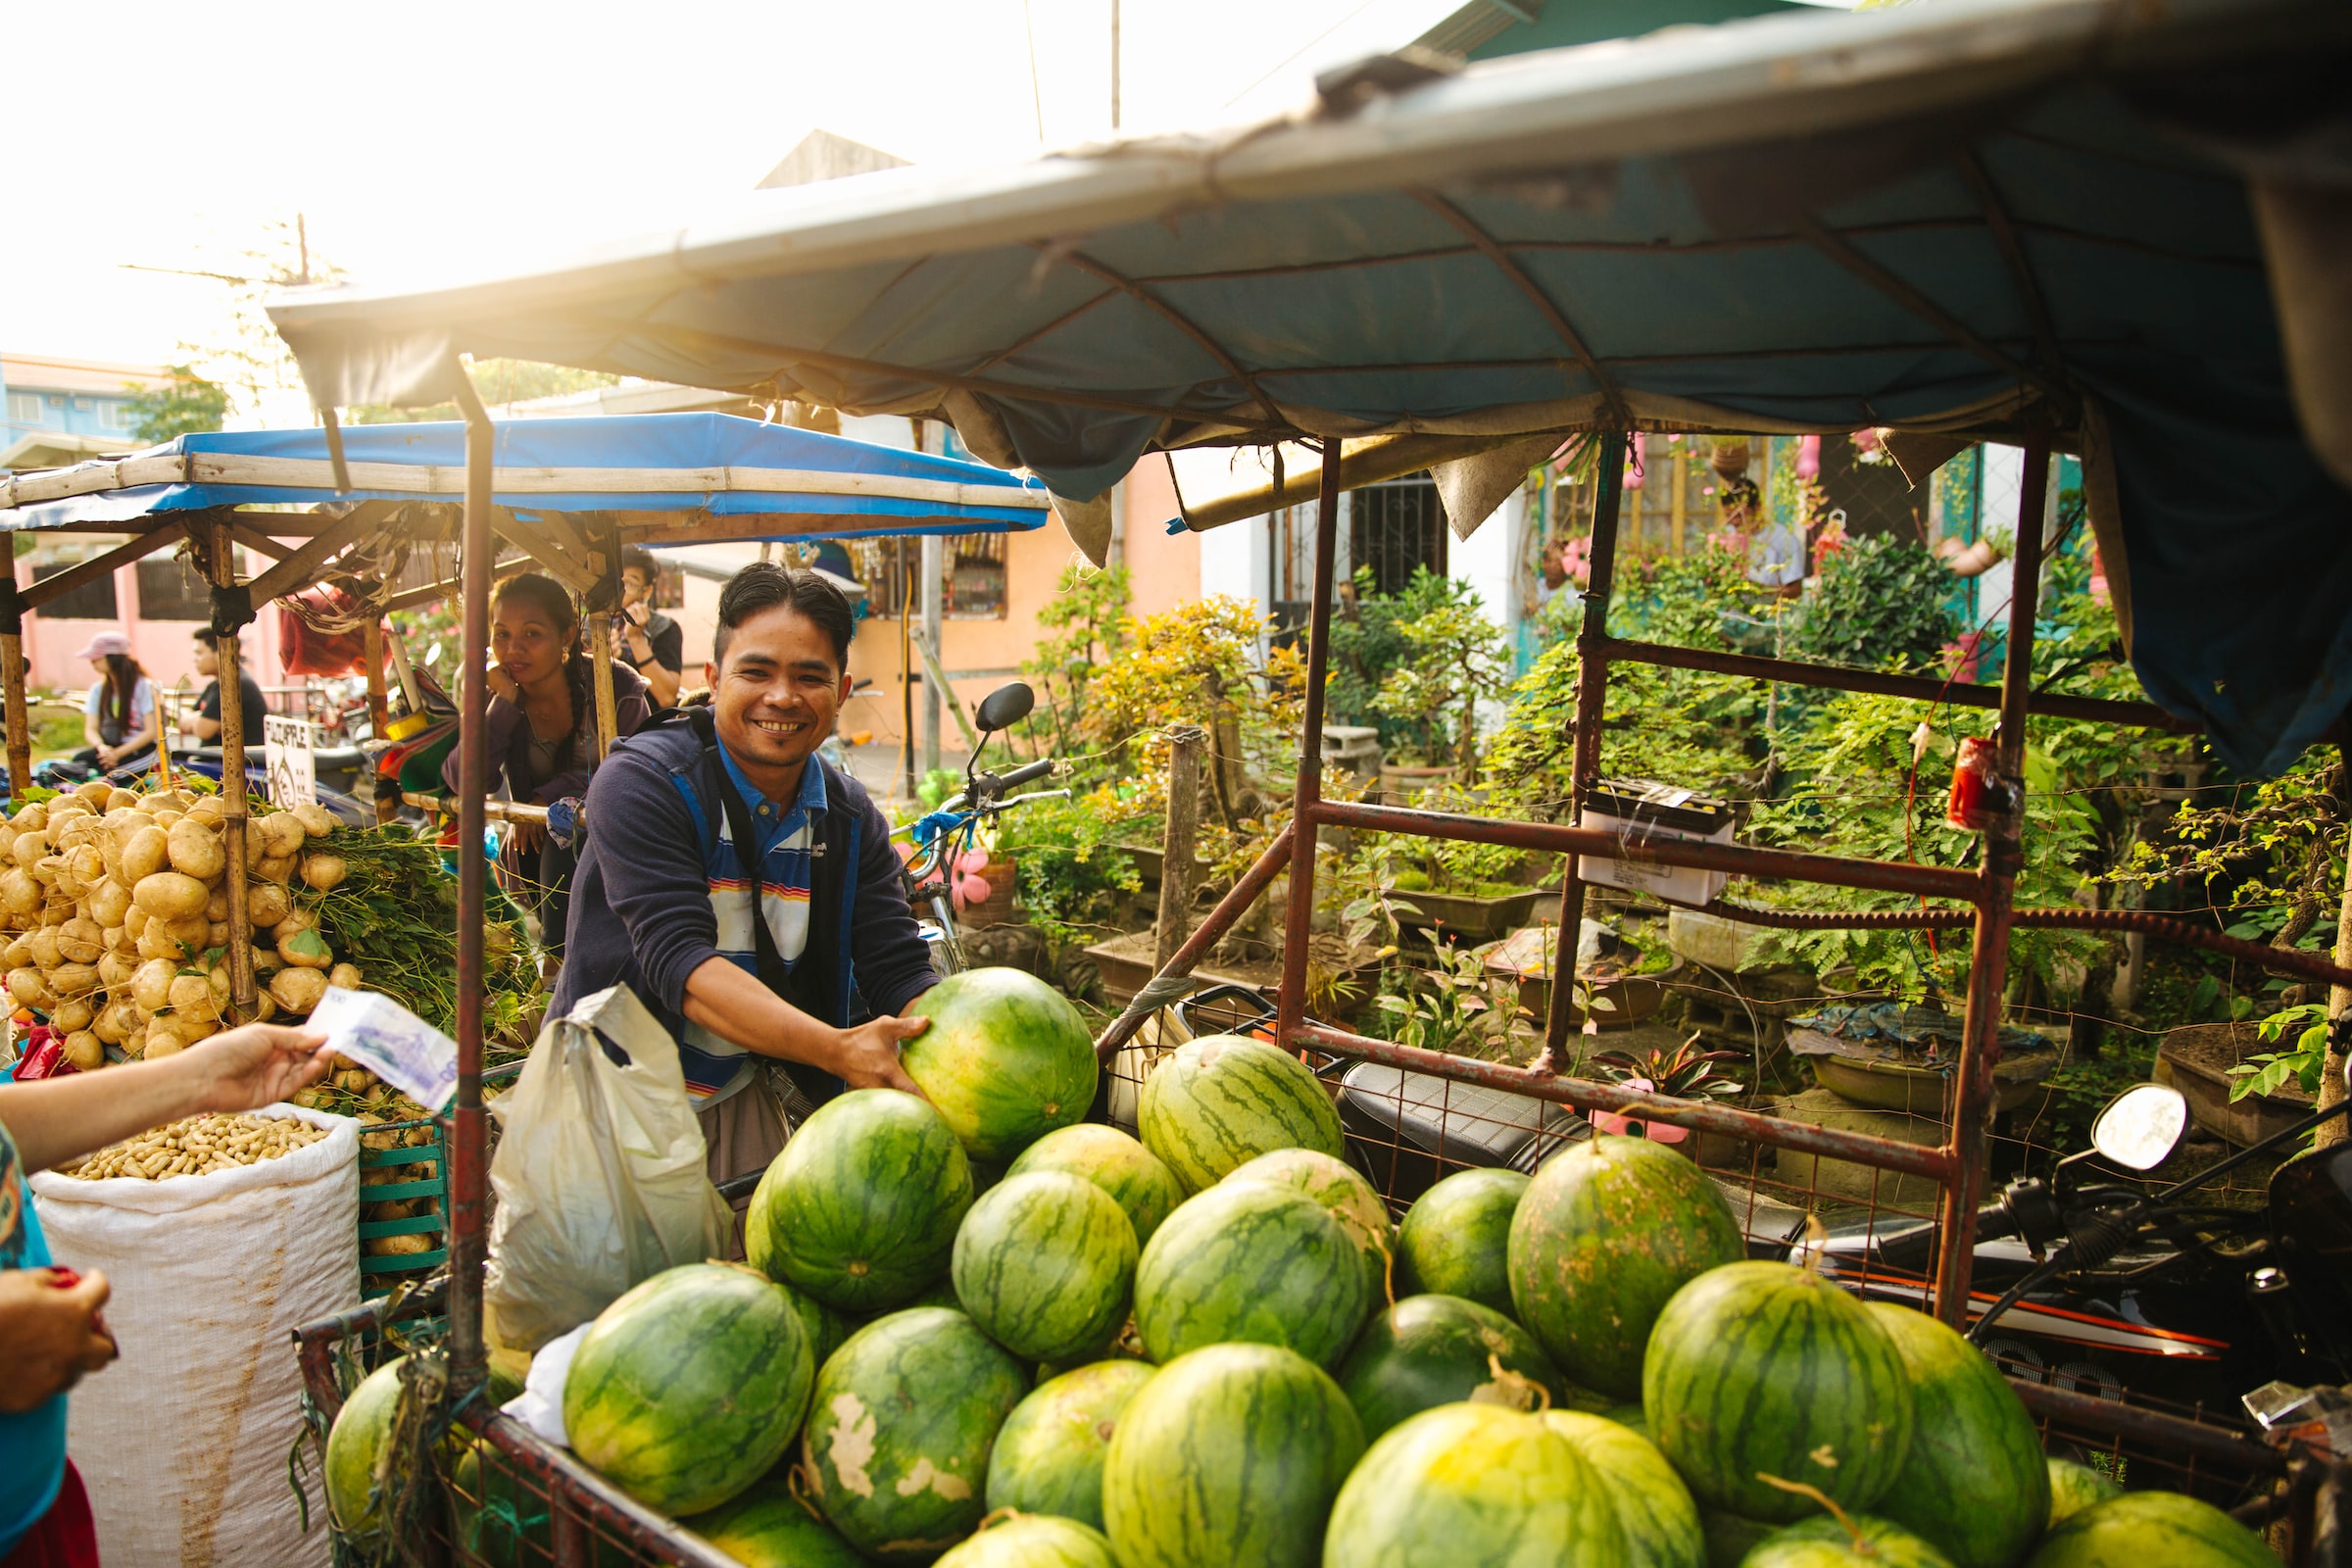 Man selling watermelons in the market